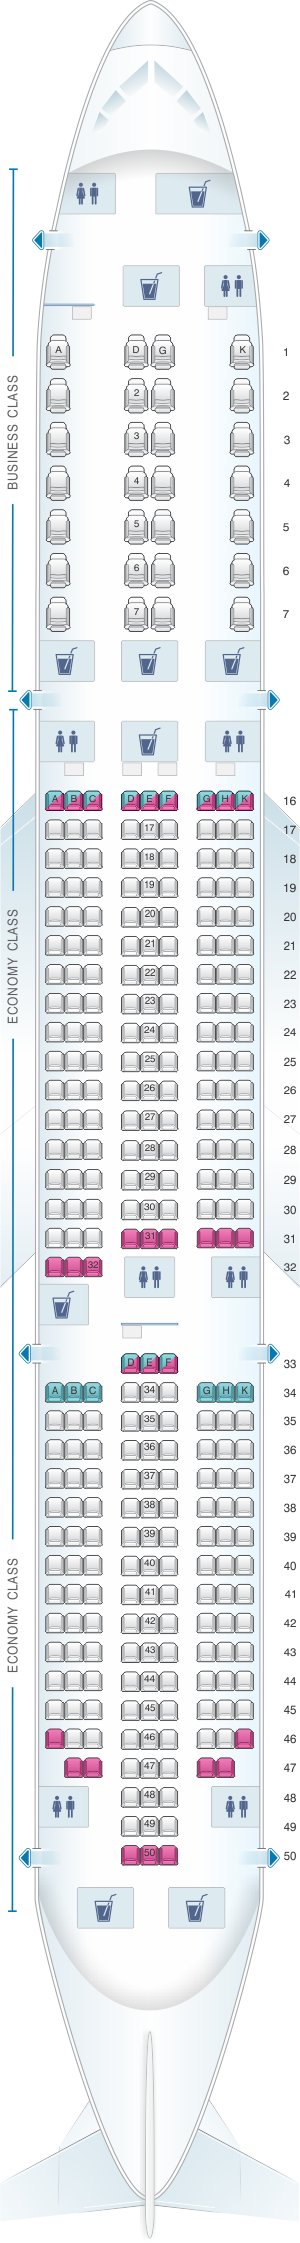 Seat map for Vietnam Airlines Boeing B787-9 V2